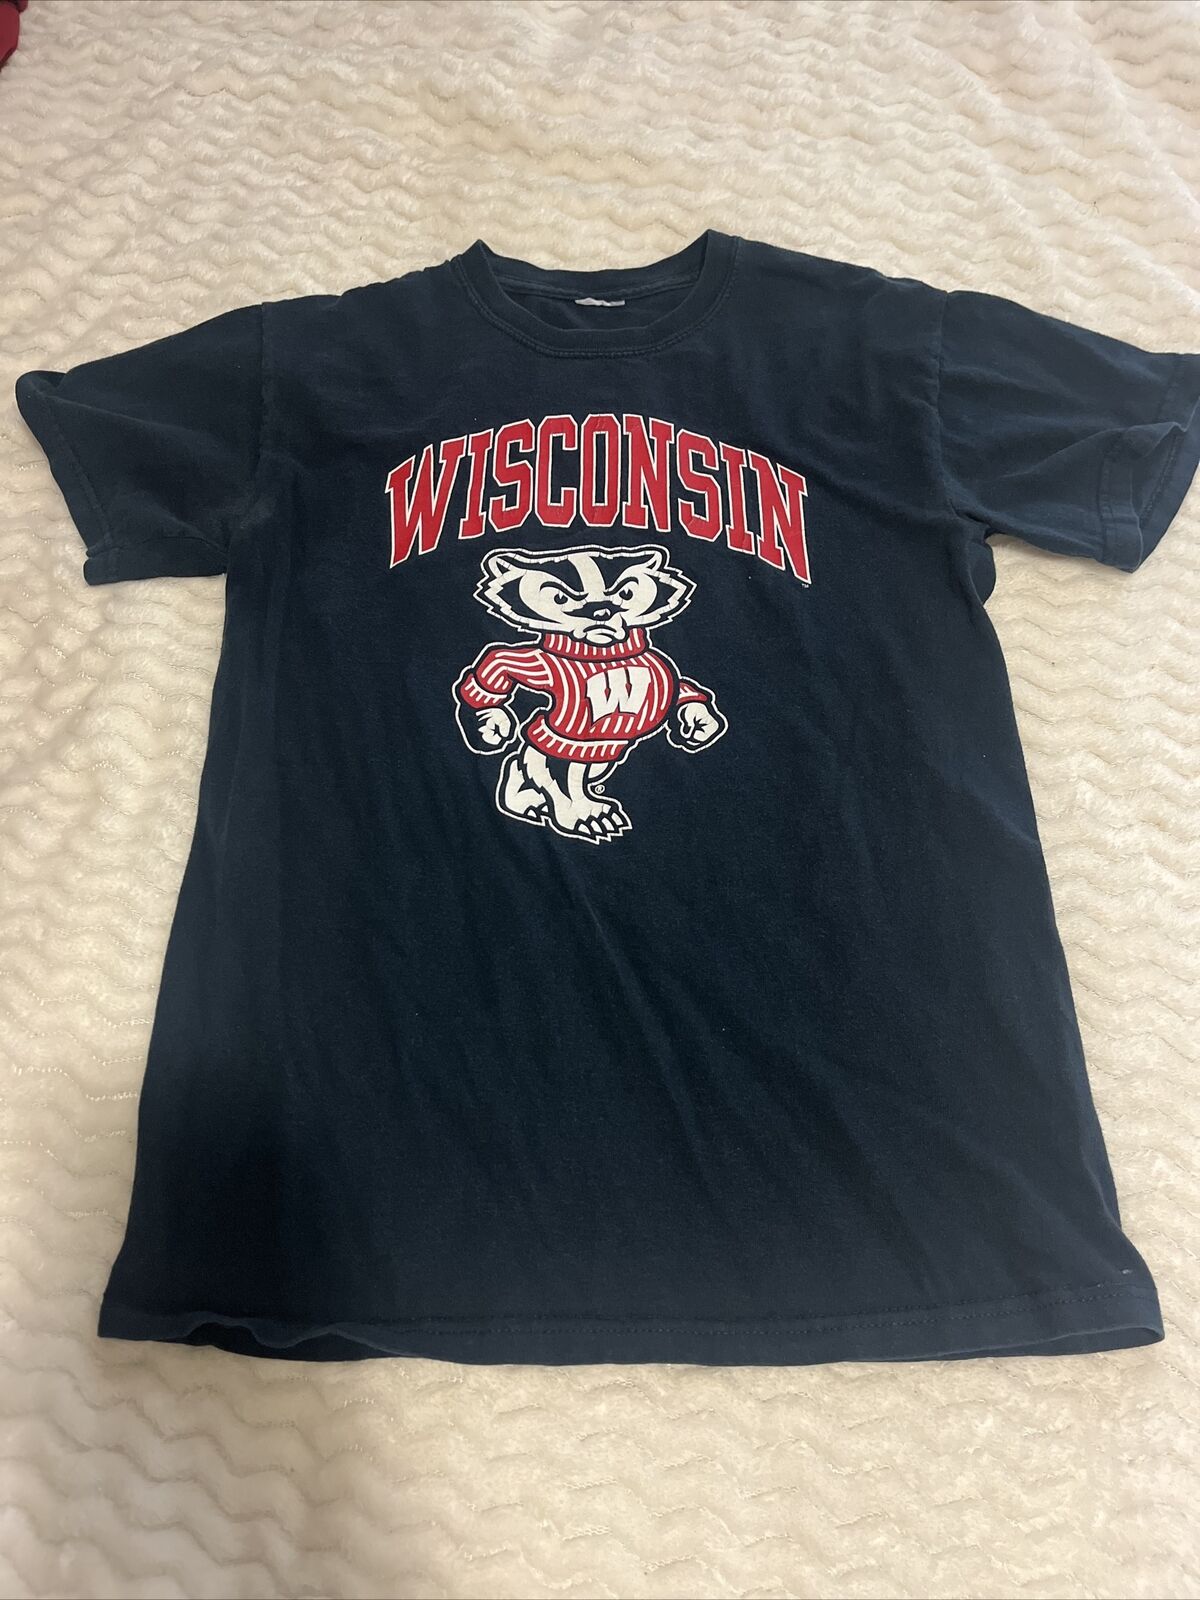 Vintage Wisconsin Graphic T-shirt